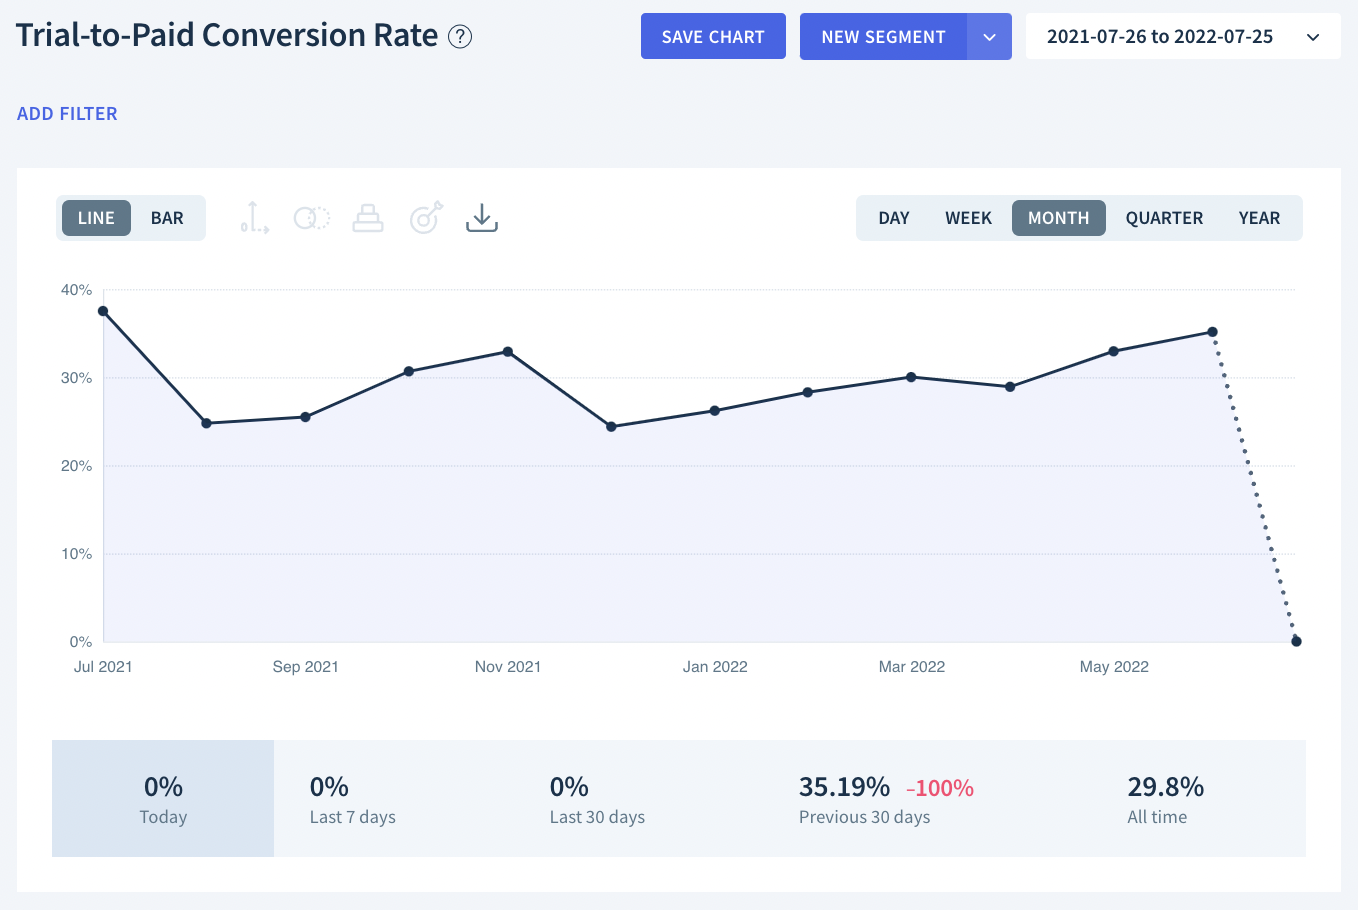 Trial-to-Paid Conversion Rate chart